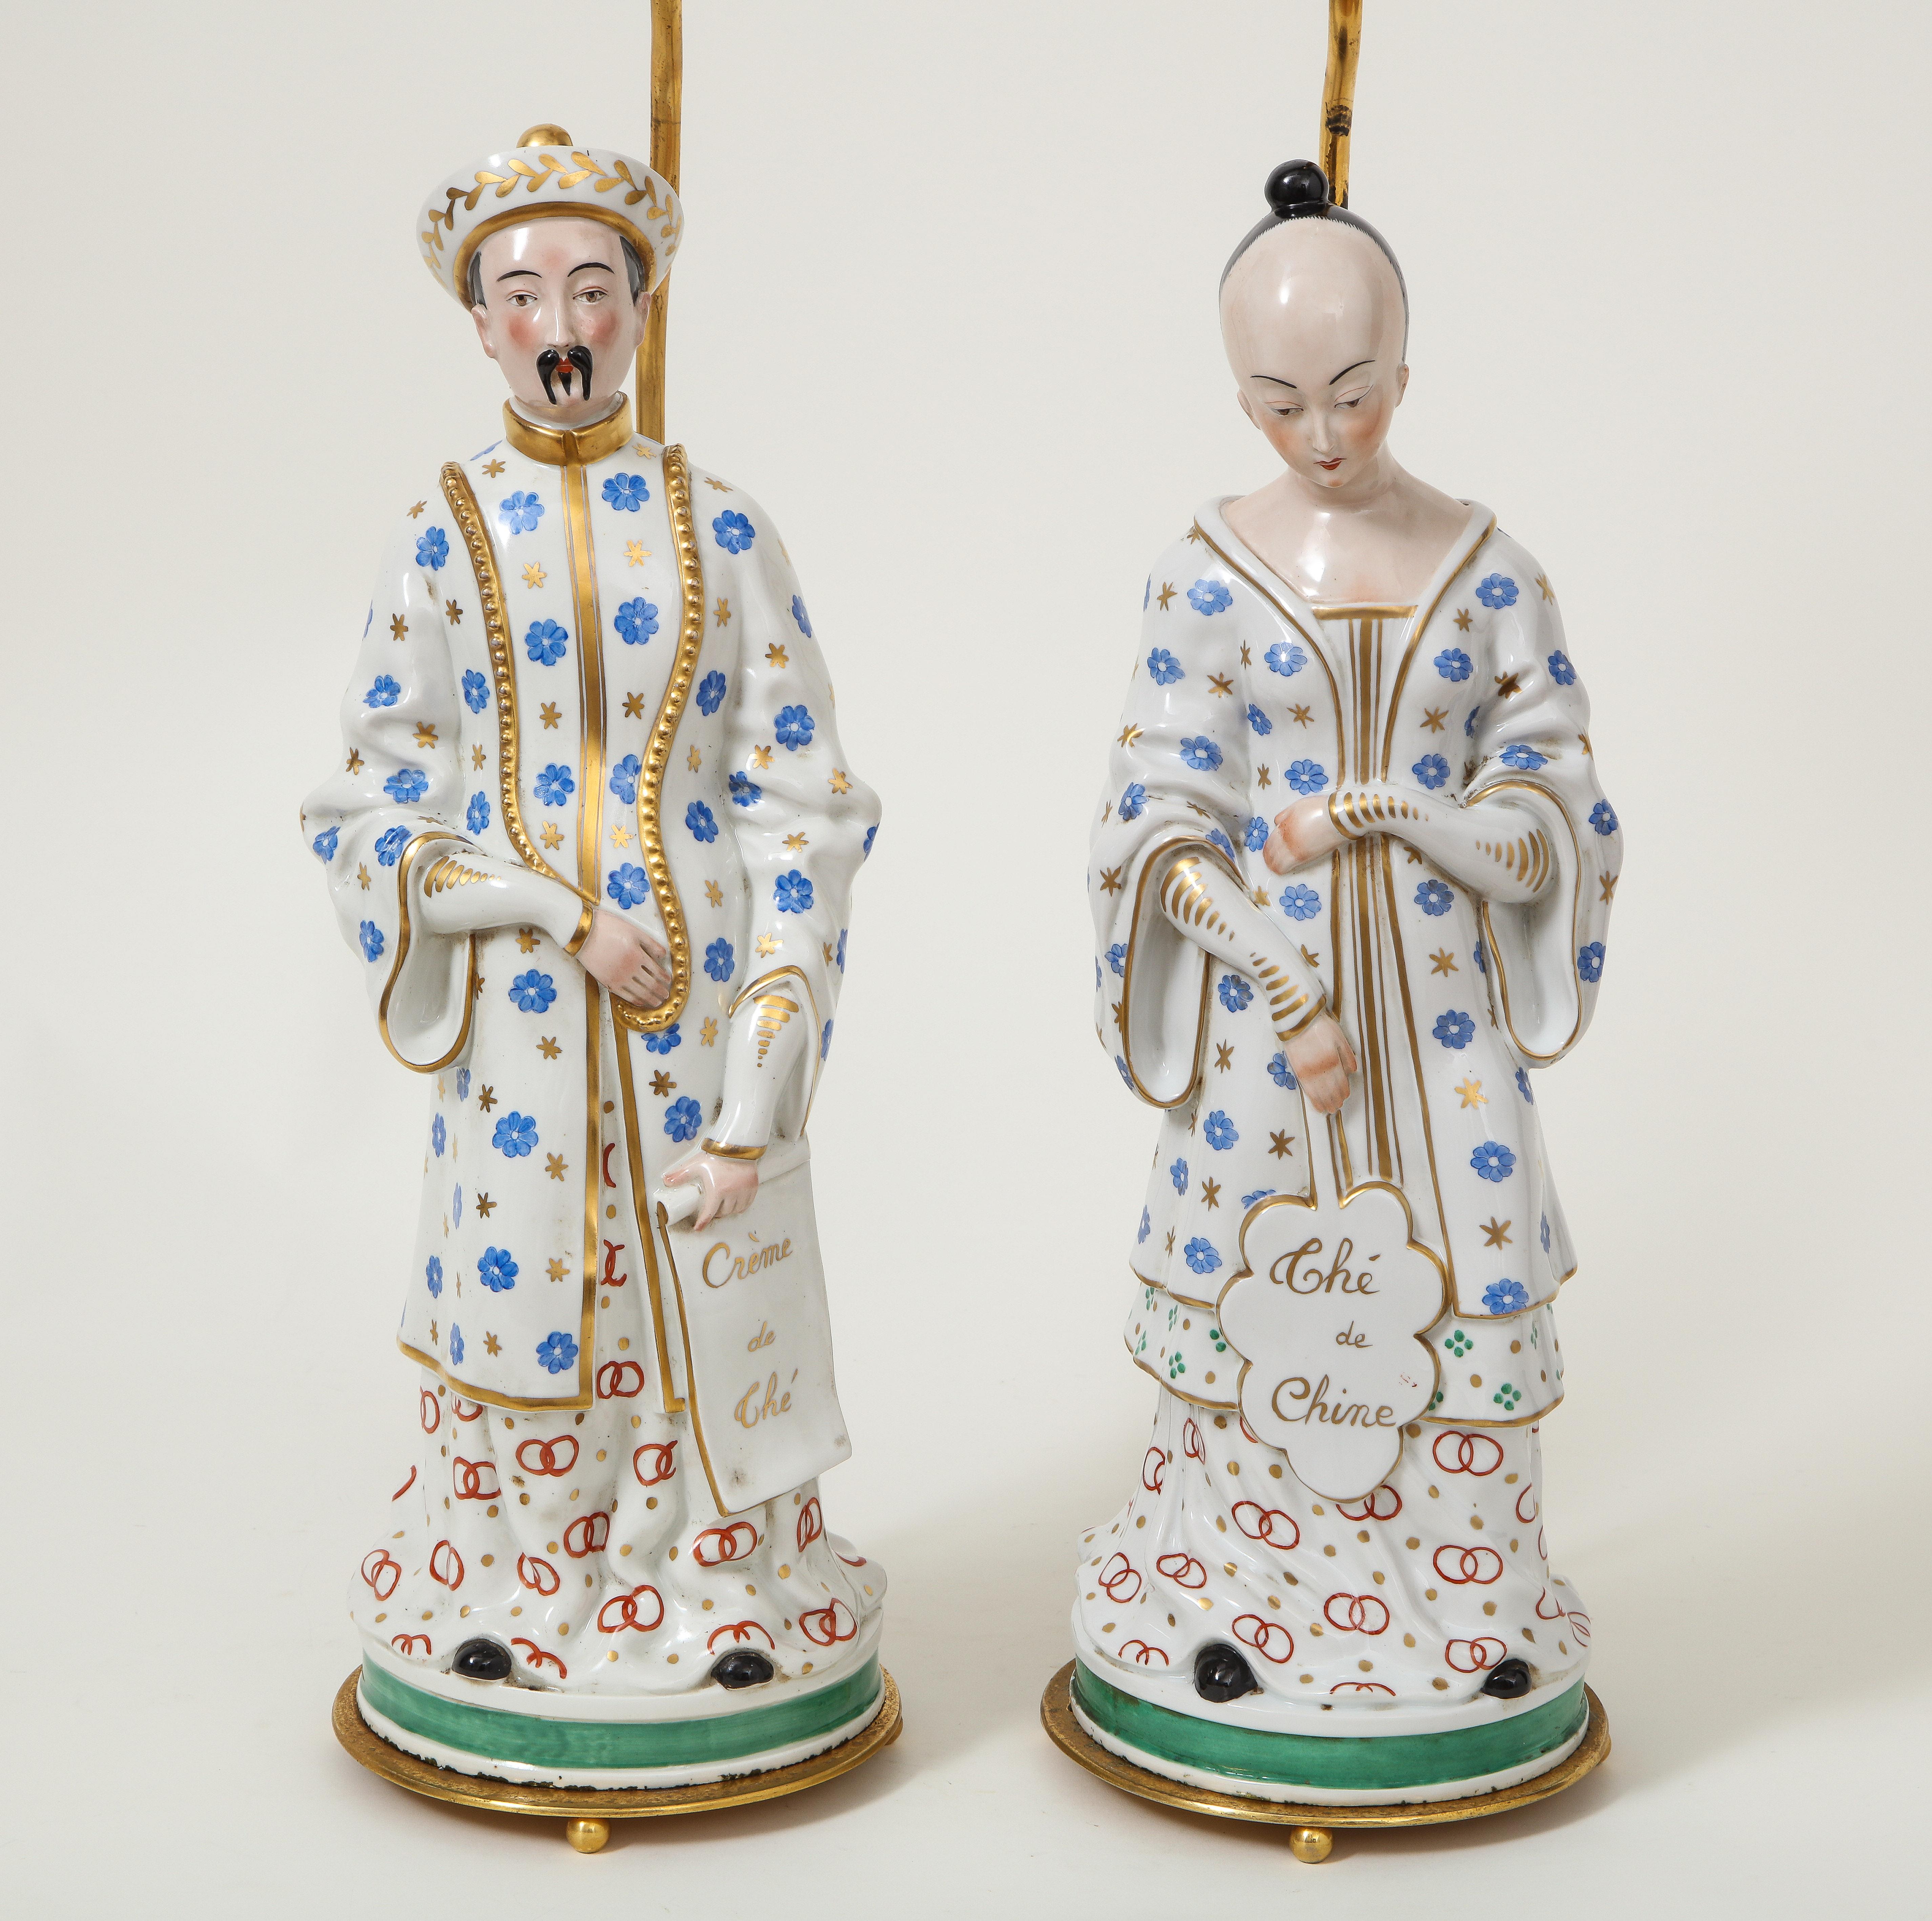 A pair of male and female court figures dress in blue, white and gilt robes, mounted on a gilt bases; the male holding a fan inscribed 